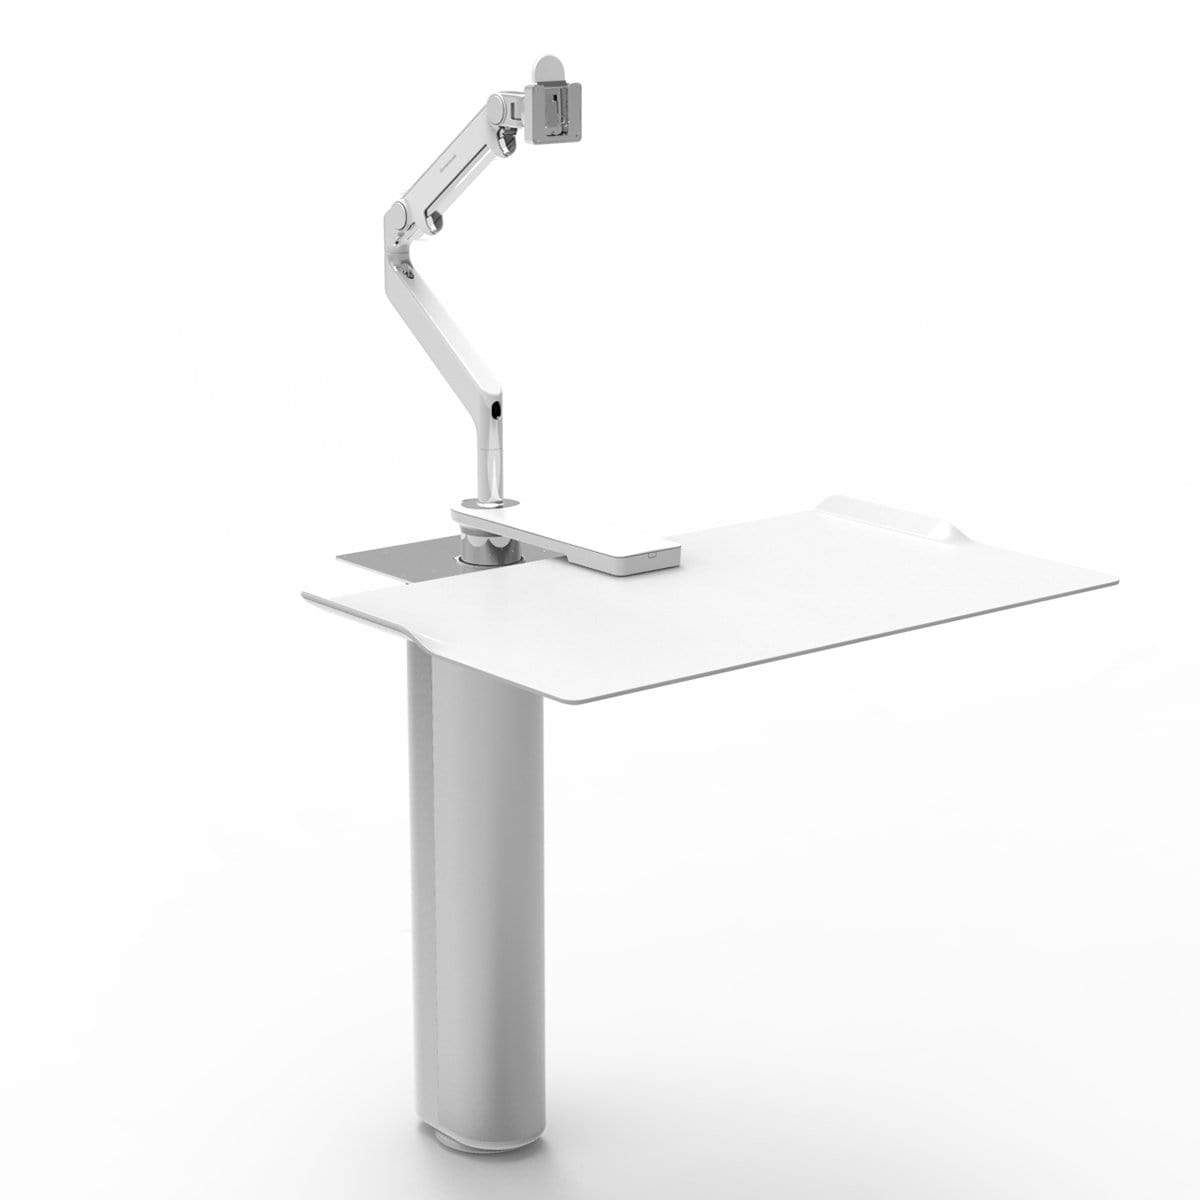 Humanscale Under Desk White / M2 Monitor Arm Mount (Arm Sold Separately) Humanscale QUICKSTAND UNDER DESK